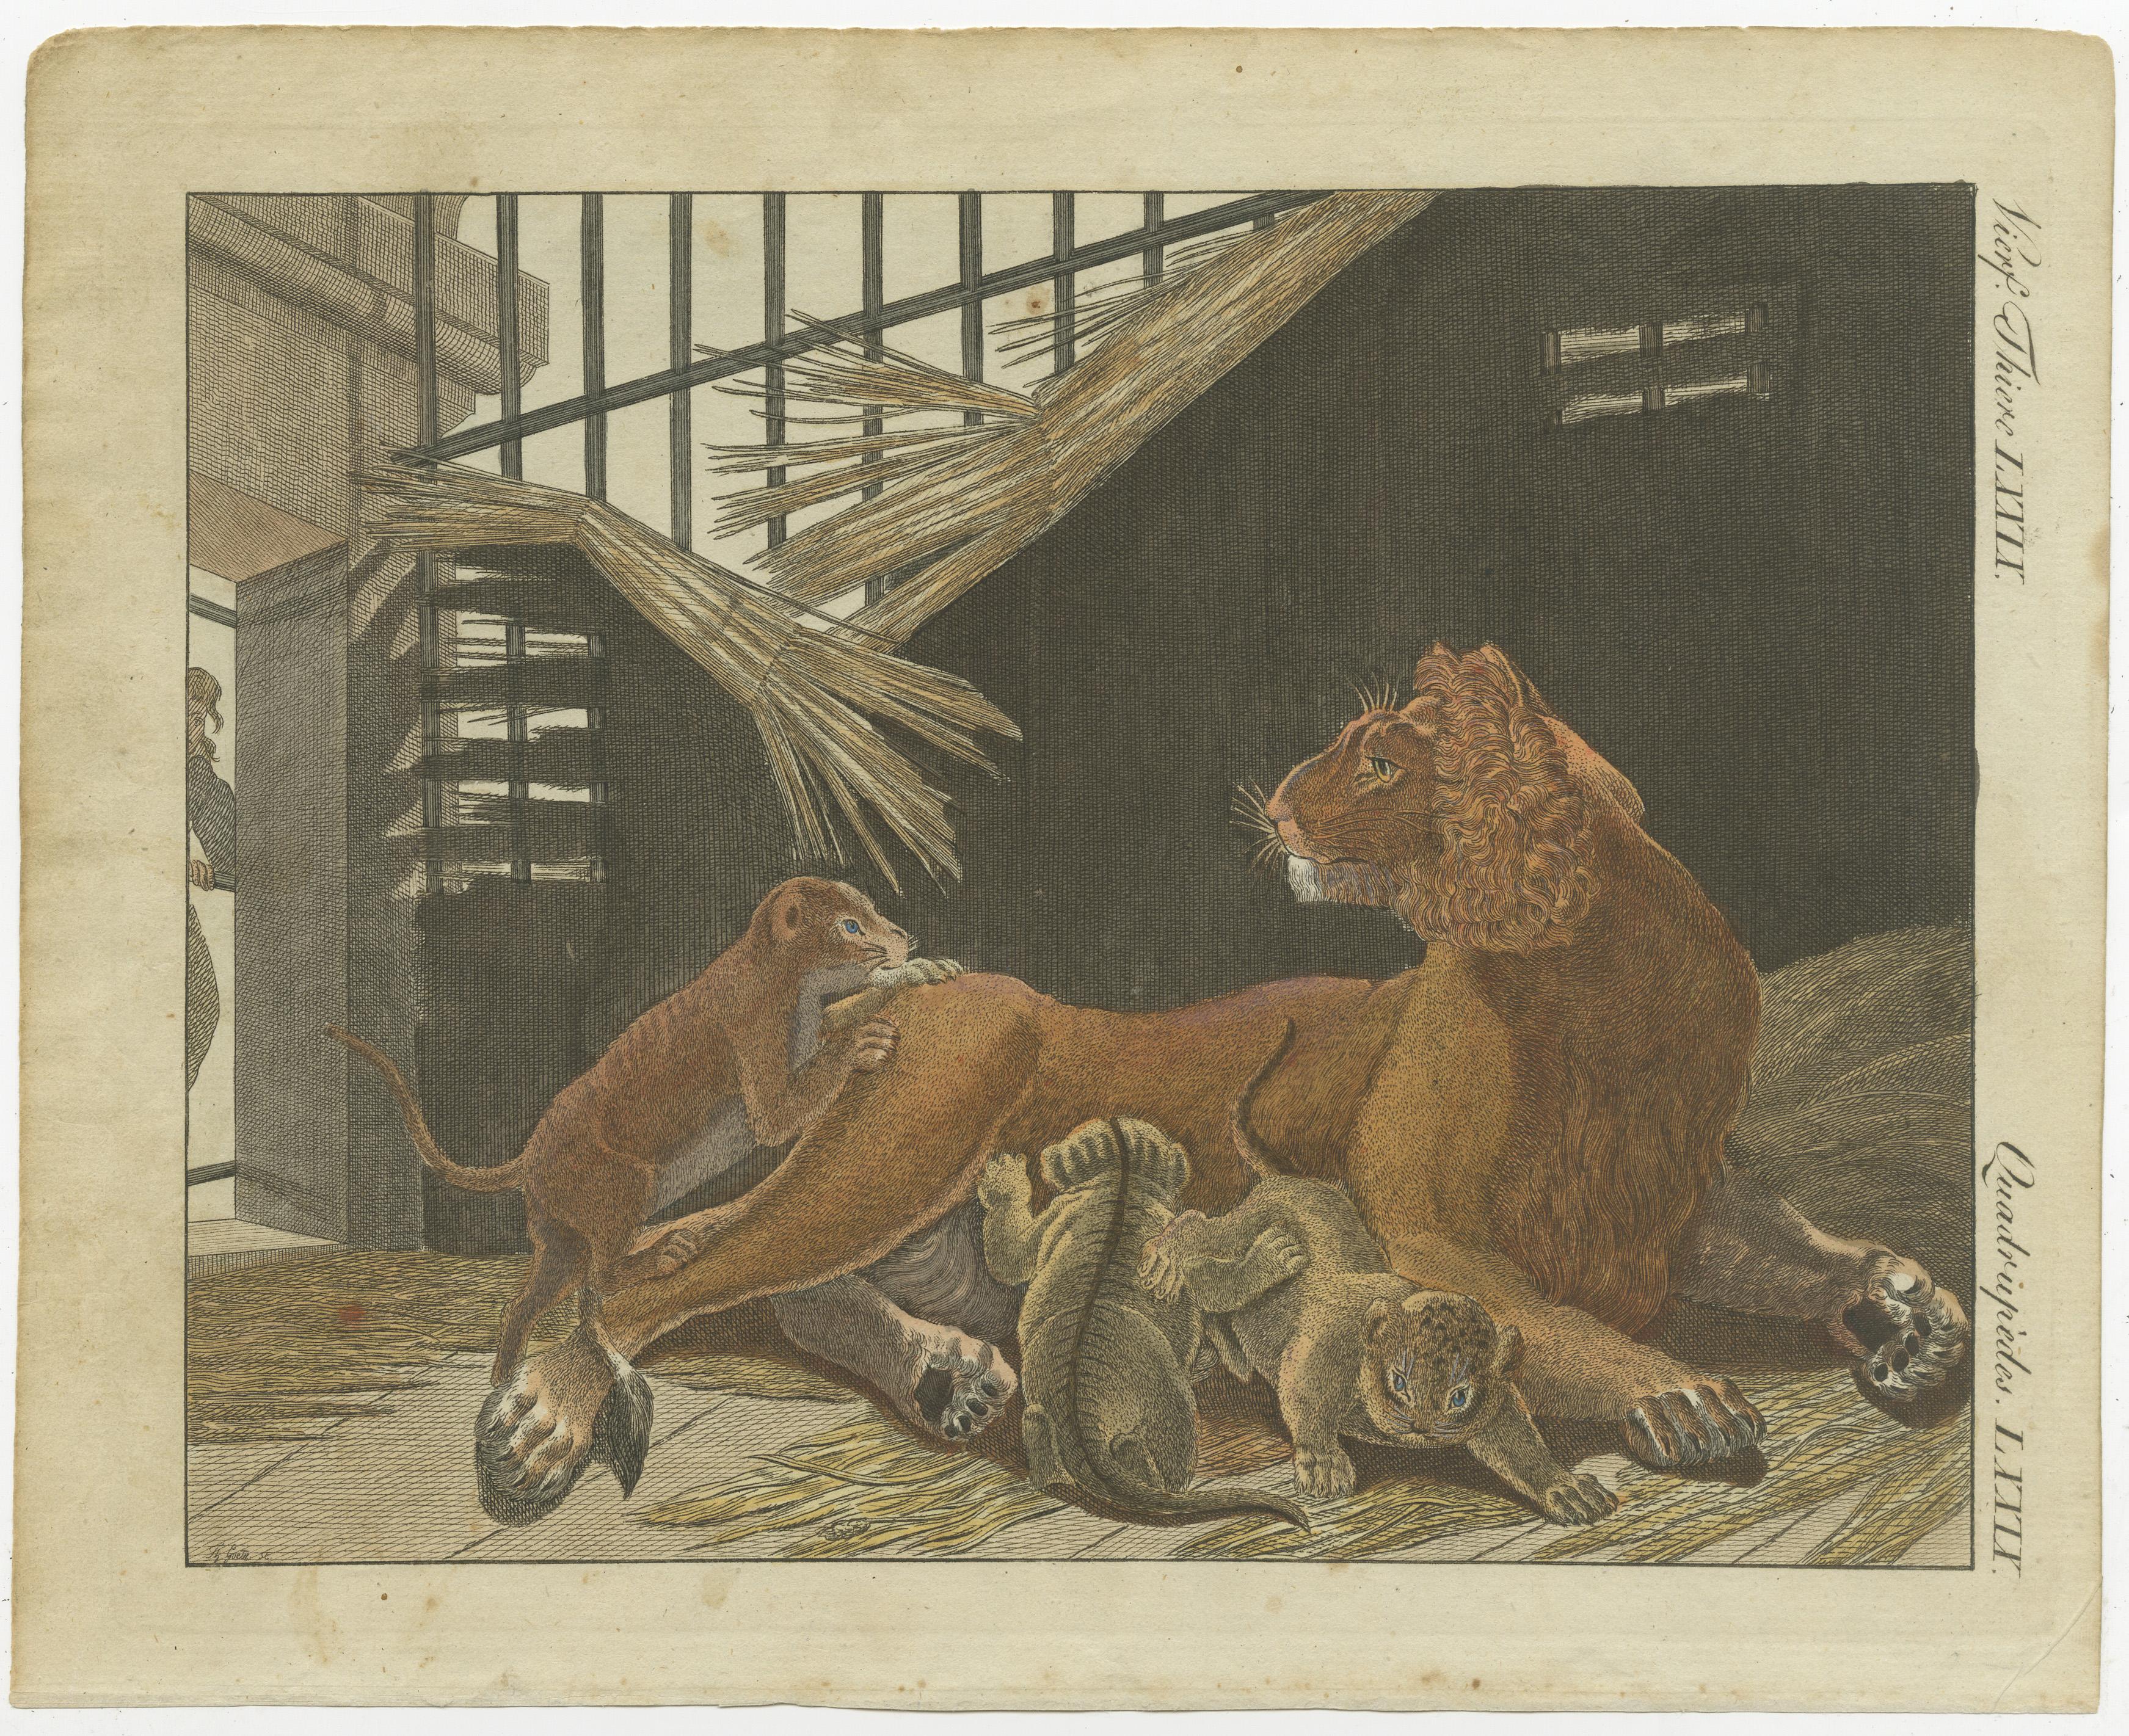 Original antique print of a lion and lion cubs. Source unknown, to be determined. Most likely published by or after Bertuch, circa 1795.